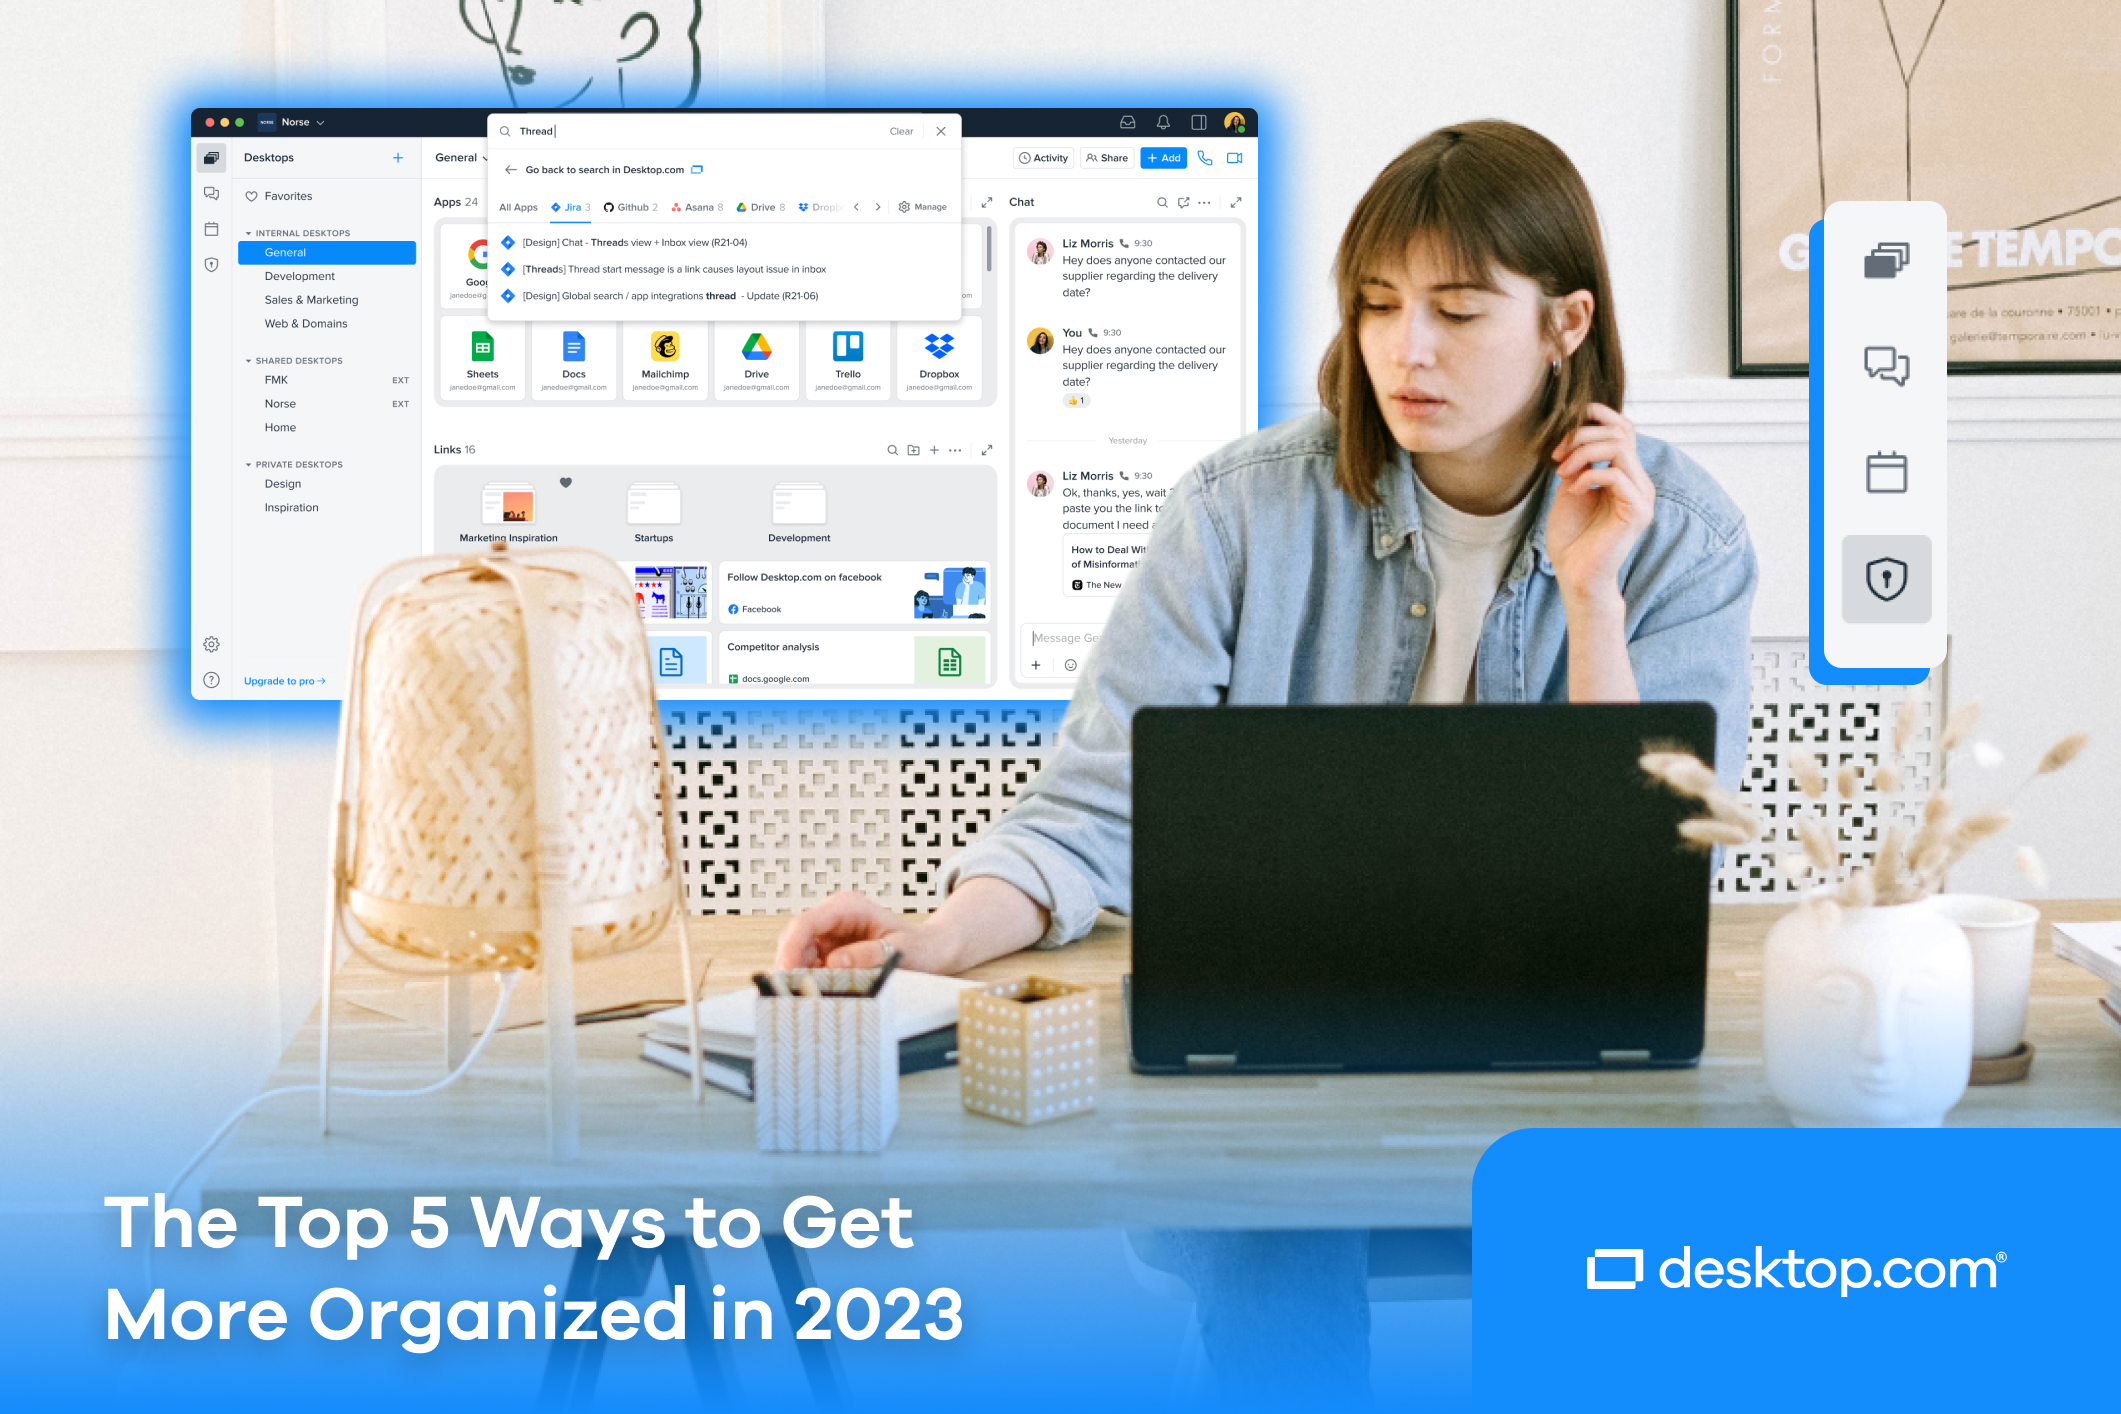 The Top 5 Ways to Get More Organized in 2023